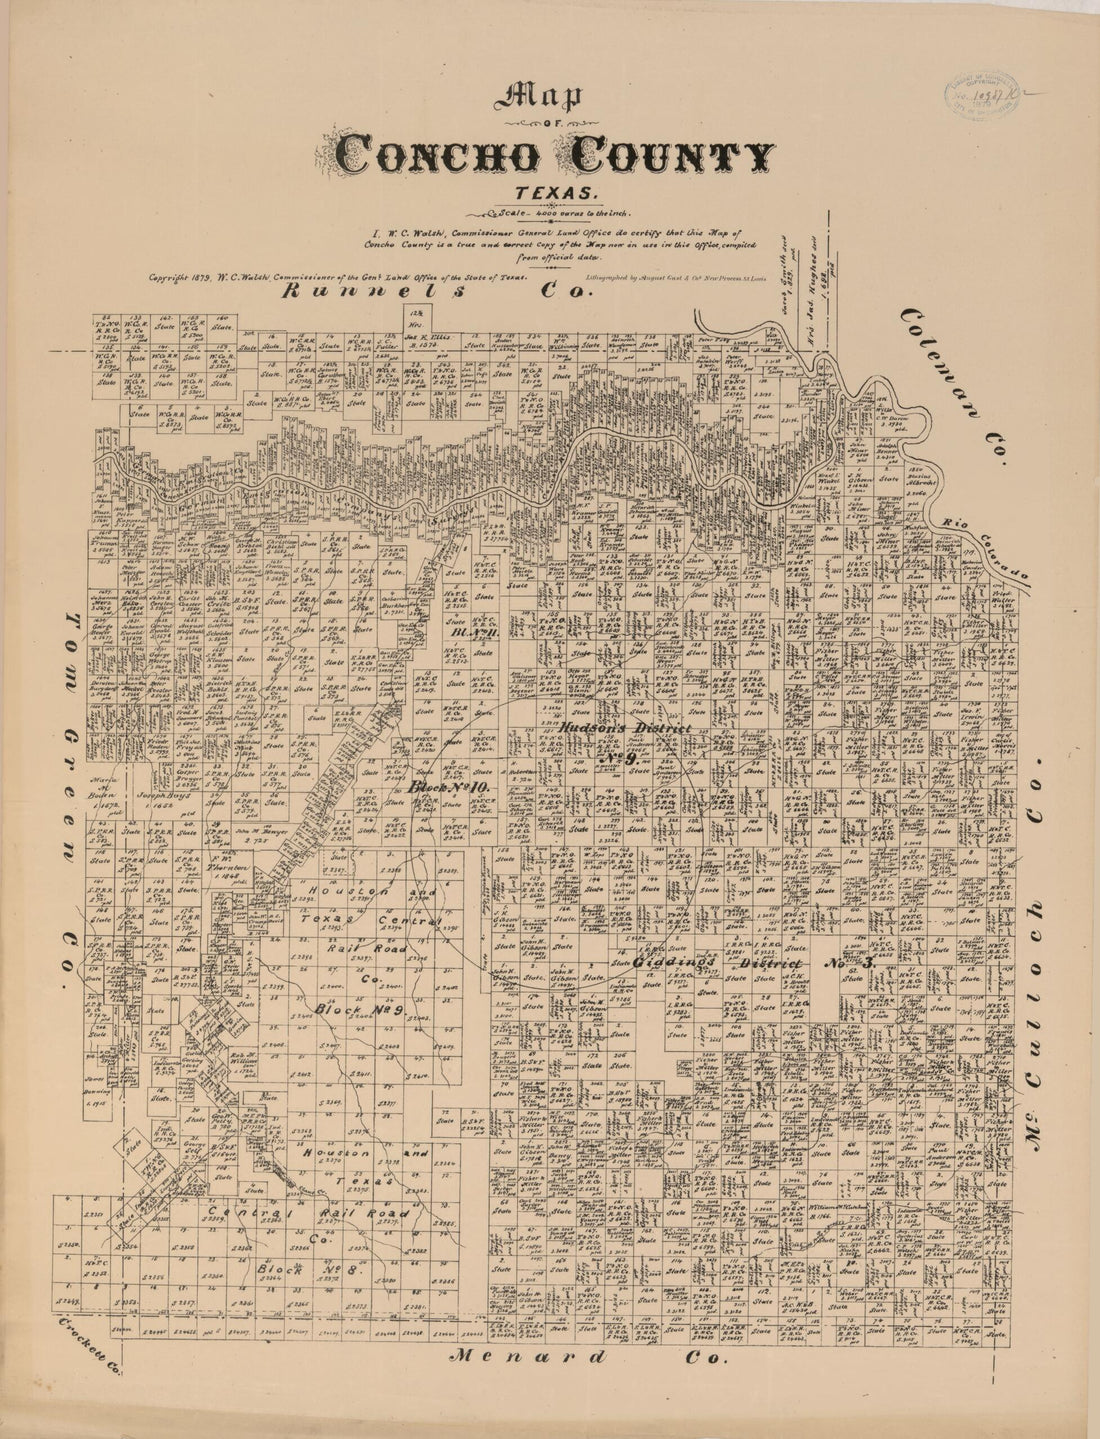 This old map of Map of Concho County, Texas from 1879 was created by  August Gast &amp; Co,  Texas. General Land Office, W. C. (William C.) Walsh in 1879